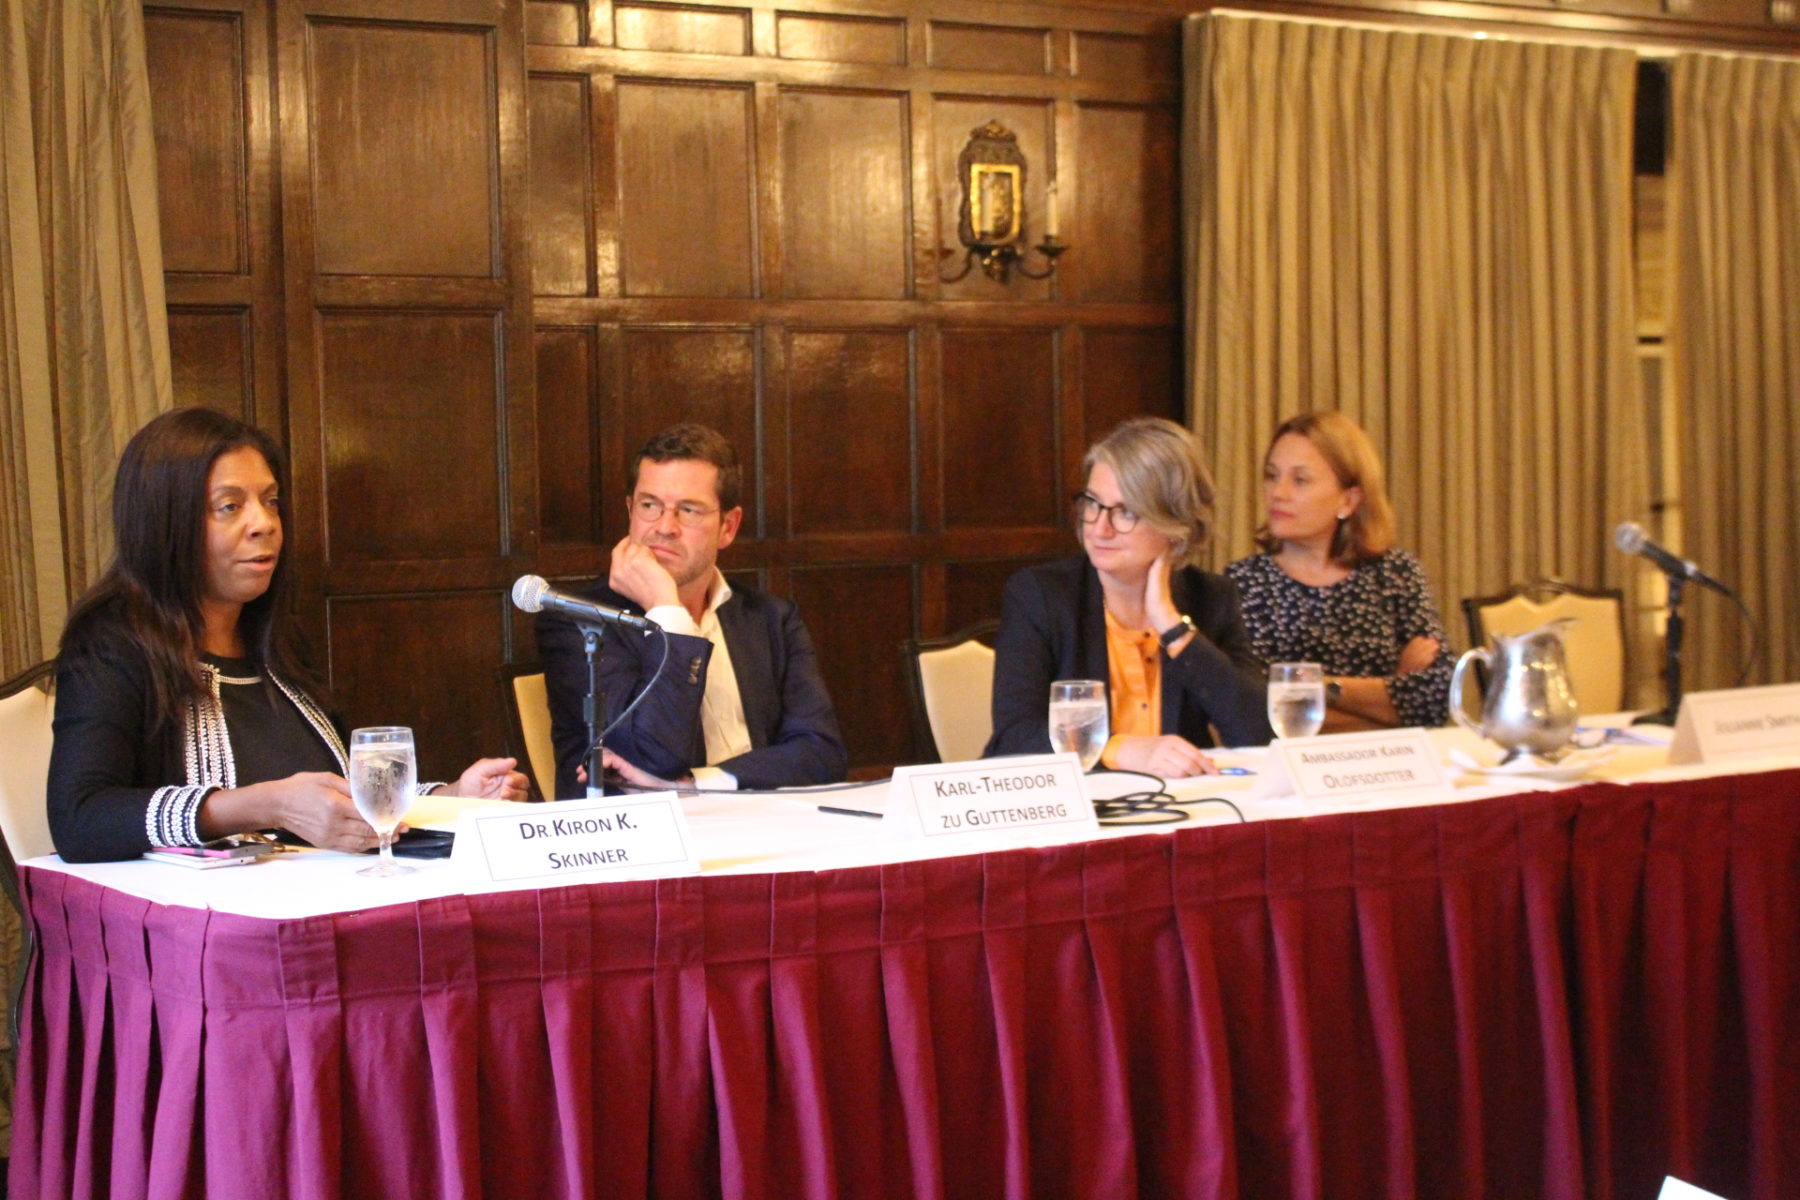 October 19- Dr. Kiron Skinner, Karl-Theodor zu Guttenberg, Ambassador Karin Olofsdotter, and Julianne Smith take part in a public event at the Omni William Penn Hotel co-hosted with the World Affairs Council of Pittsburgh. 